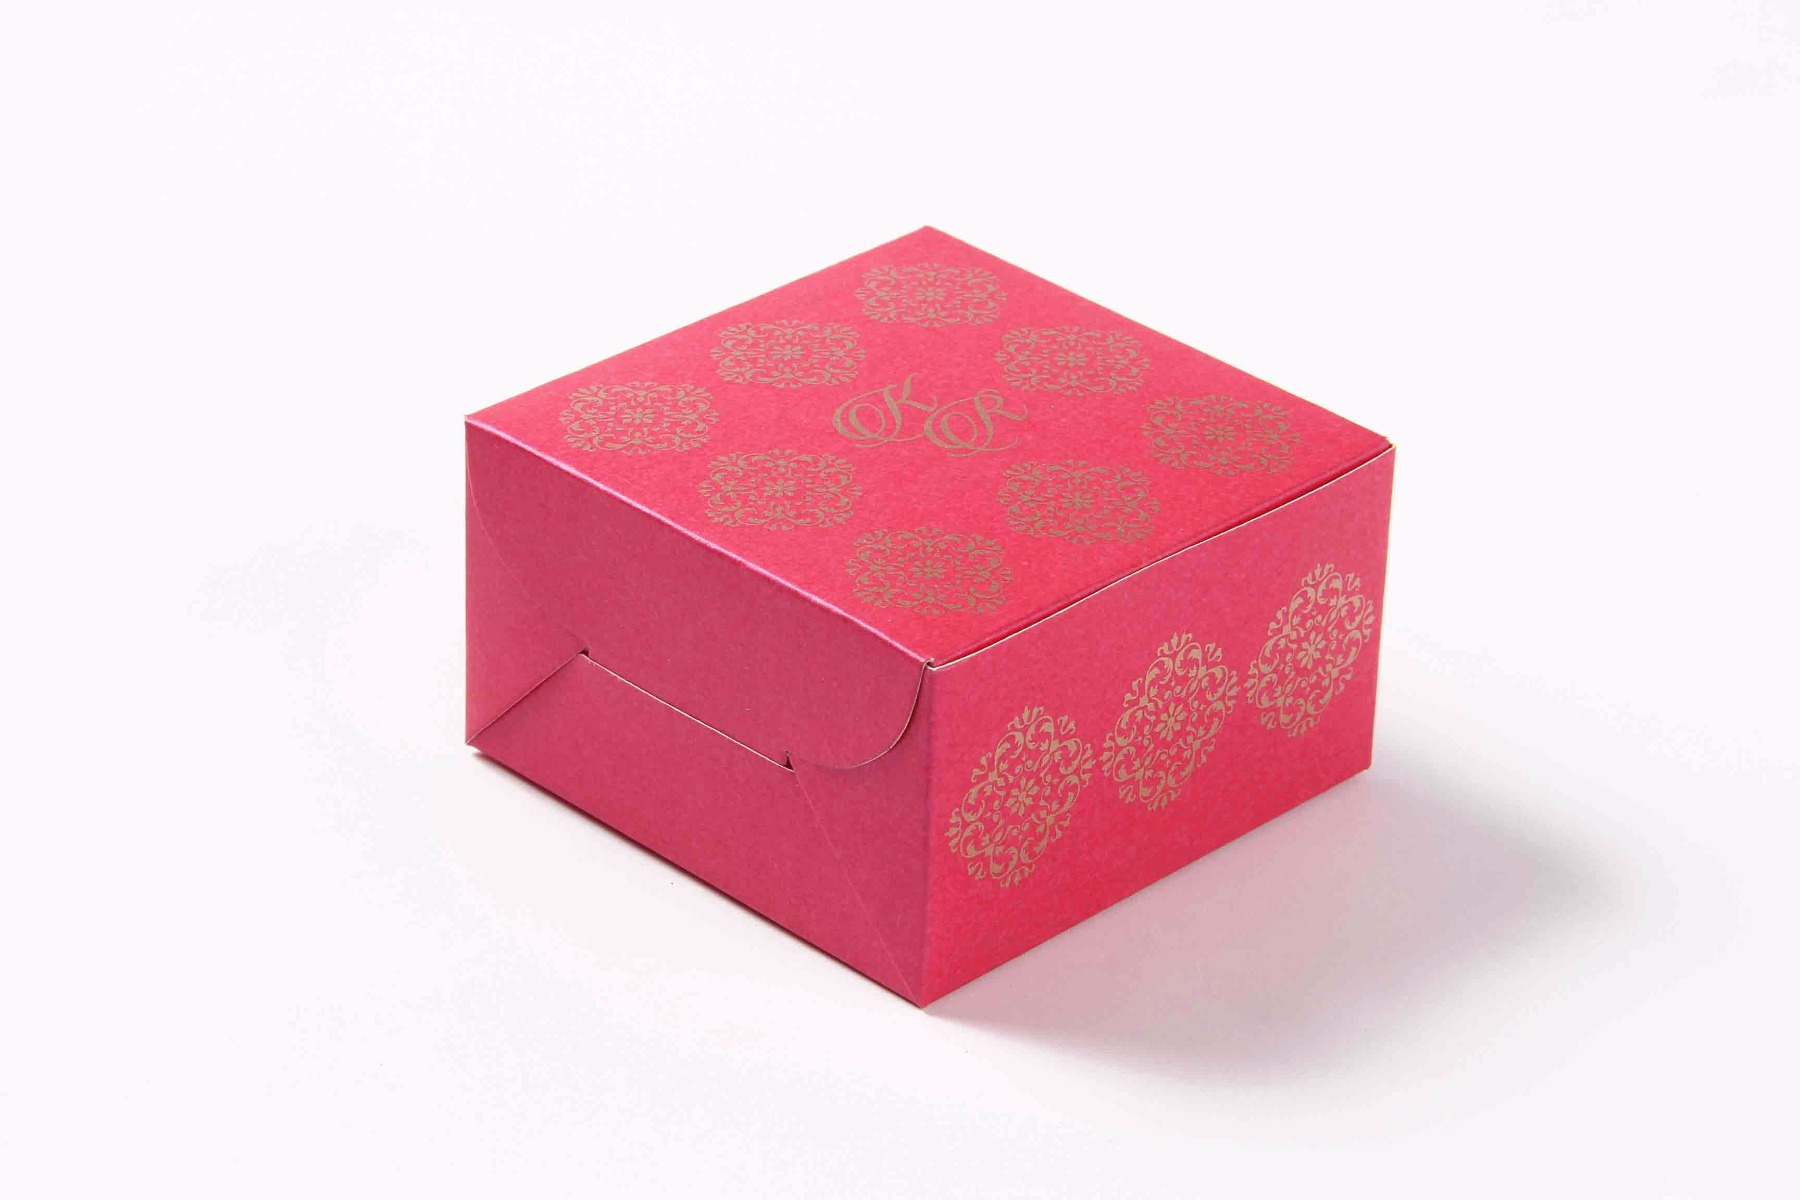 Small Size cube box in Pink Color